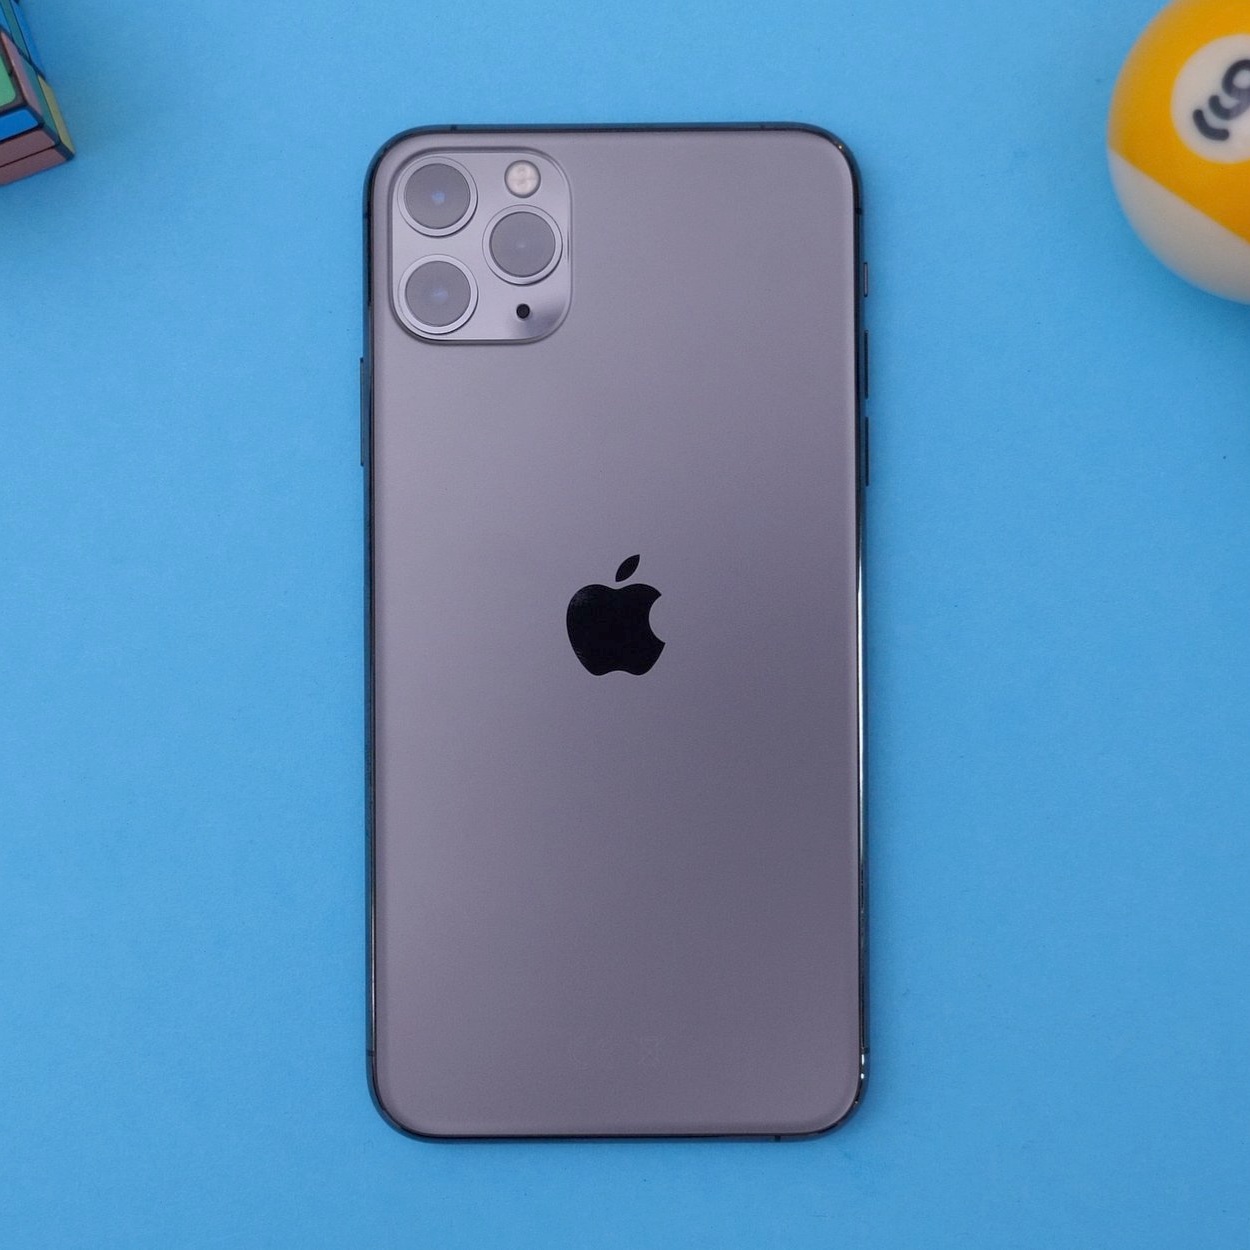 IPhone 11 Pro Max Overview: Understanding The Features Of IPhone 11 Pro Max